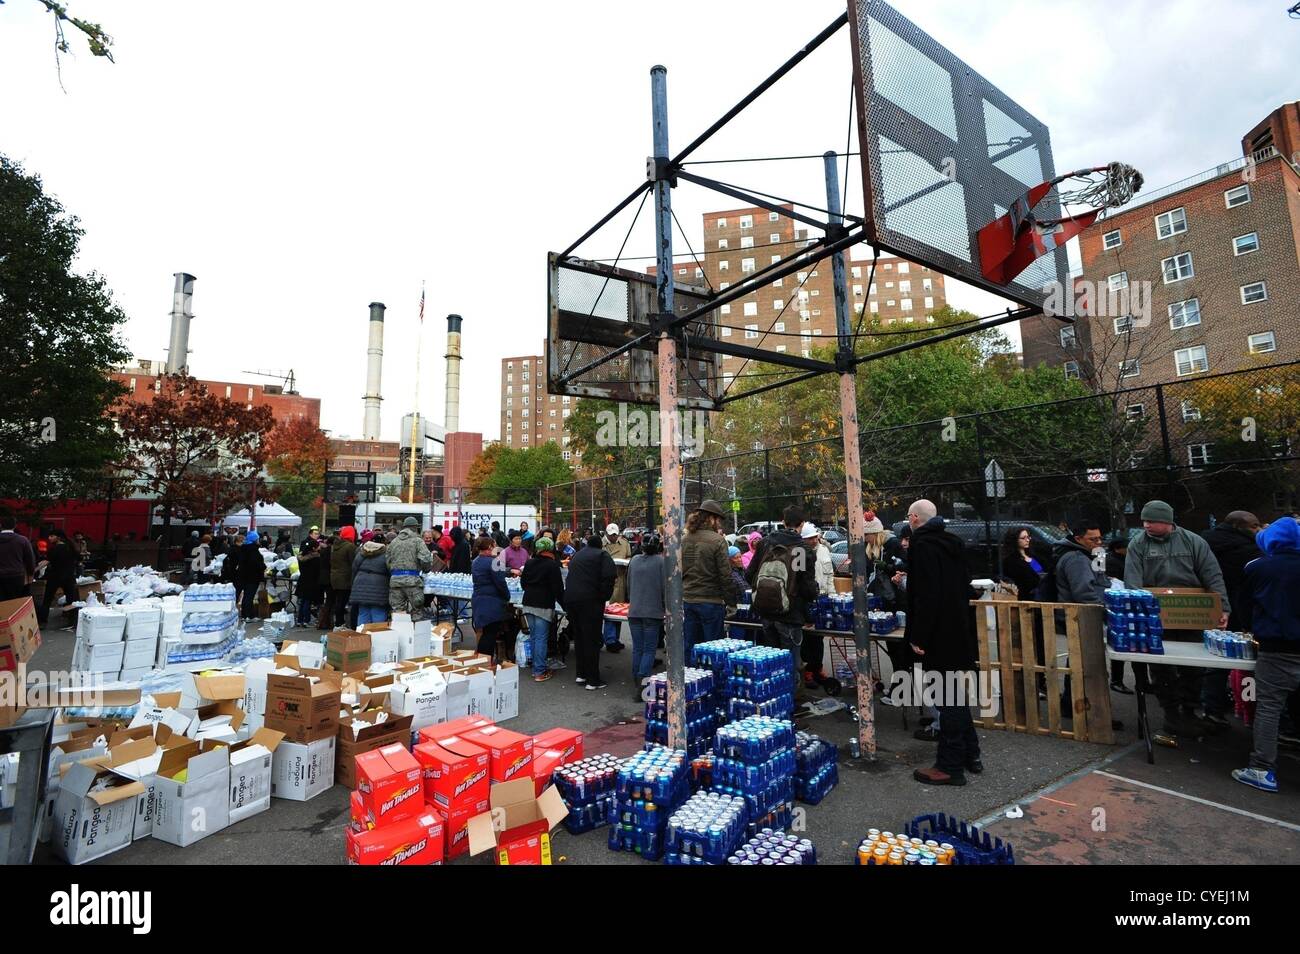 Nov. 2, 2012 - Manhattan, New York, U.S. - Members of the Air National Guard Unit 105th out of Stewart Air Force Base with community volunteers deliver and distribute food, water, toiletries, cleaning supplies and other goods to residents in the East Village at a distribution center at Vladic Palyground on East 10th Street between Avenue C and Avenue D near the ConEd plant on East 14th Street this afternoon following the effects of Hurricane Sandy in New York, November 2, 2012. (Credit Image: © Bryan Smith/ZUMAPRESS.com) Stock Photo